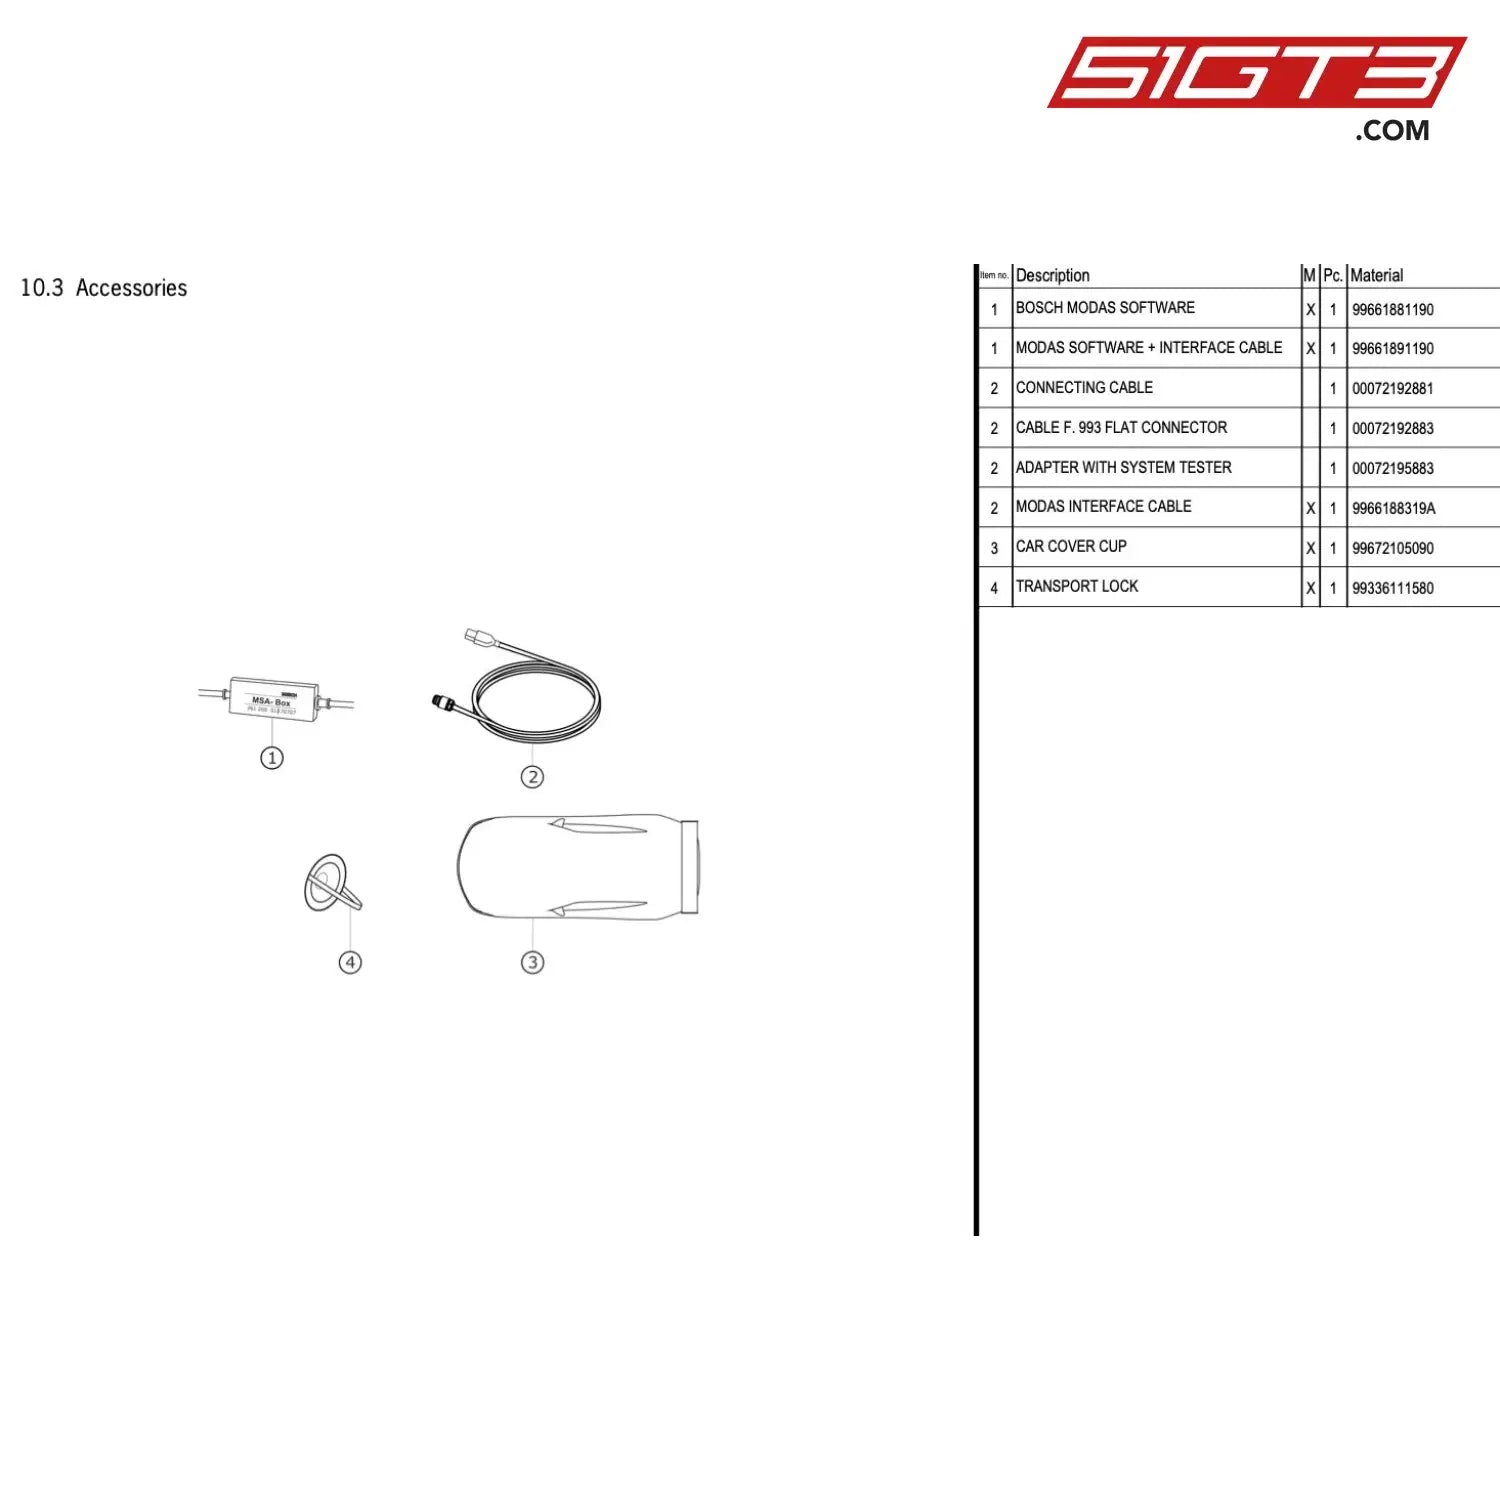 Adapter With System Tester - 72195883 [Porsche 911 Gt3 Cup Type 996] Accessories